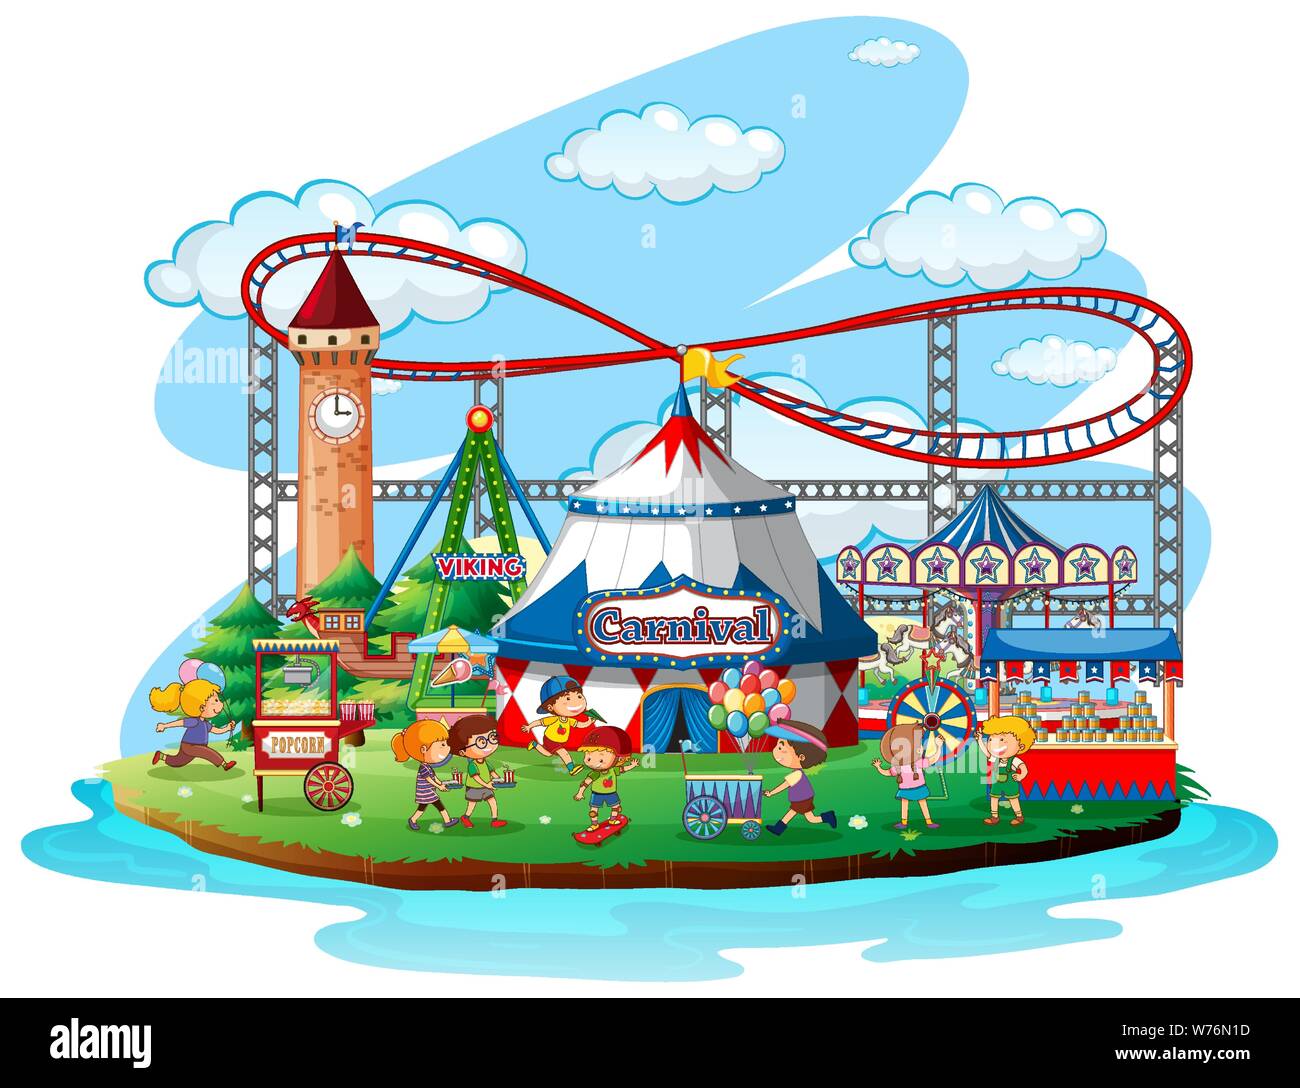 Fair Sketch Stock Vector Illustration and Royalty Free Fair Sketch Clipart